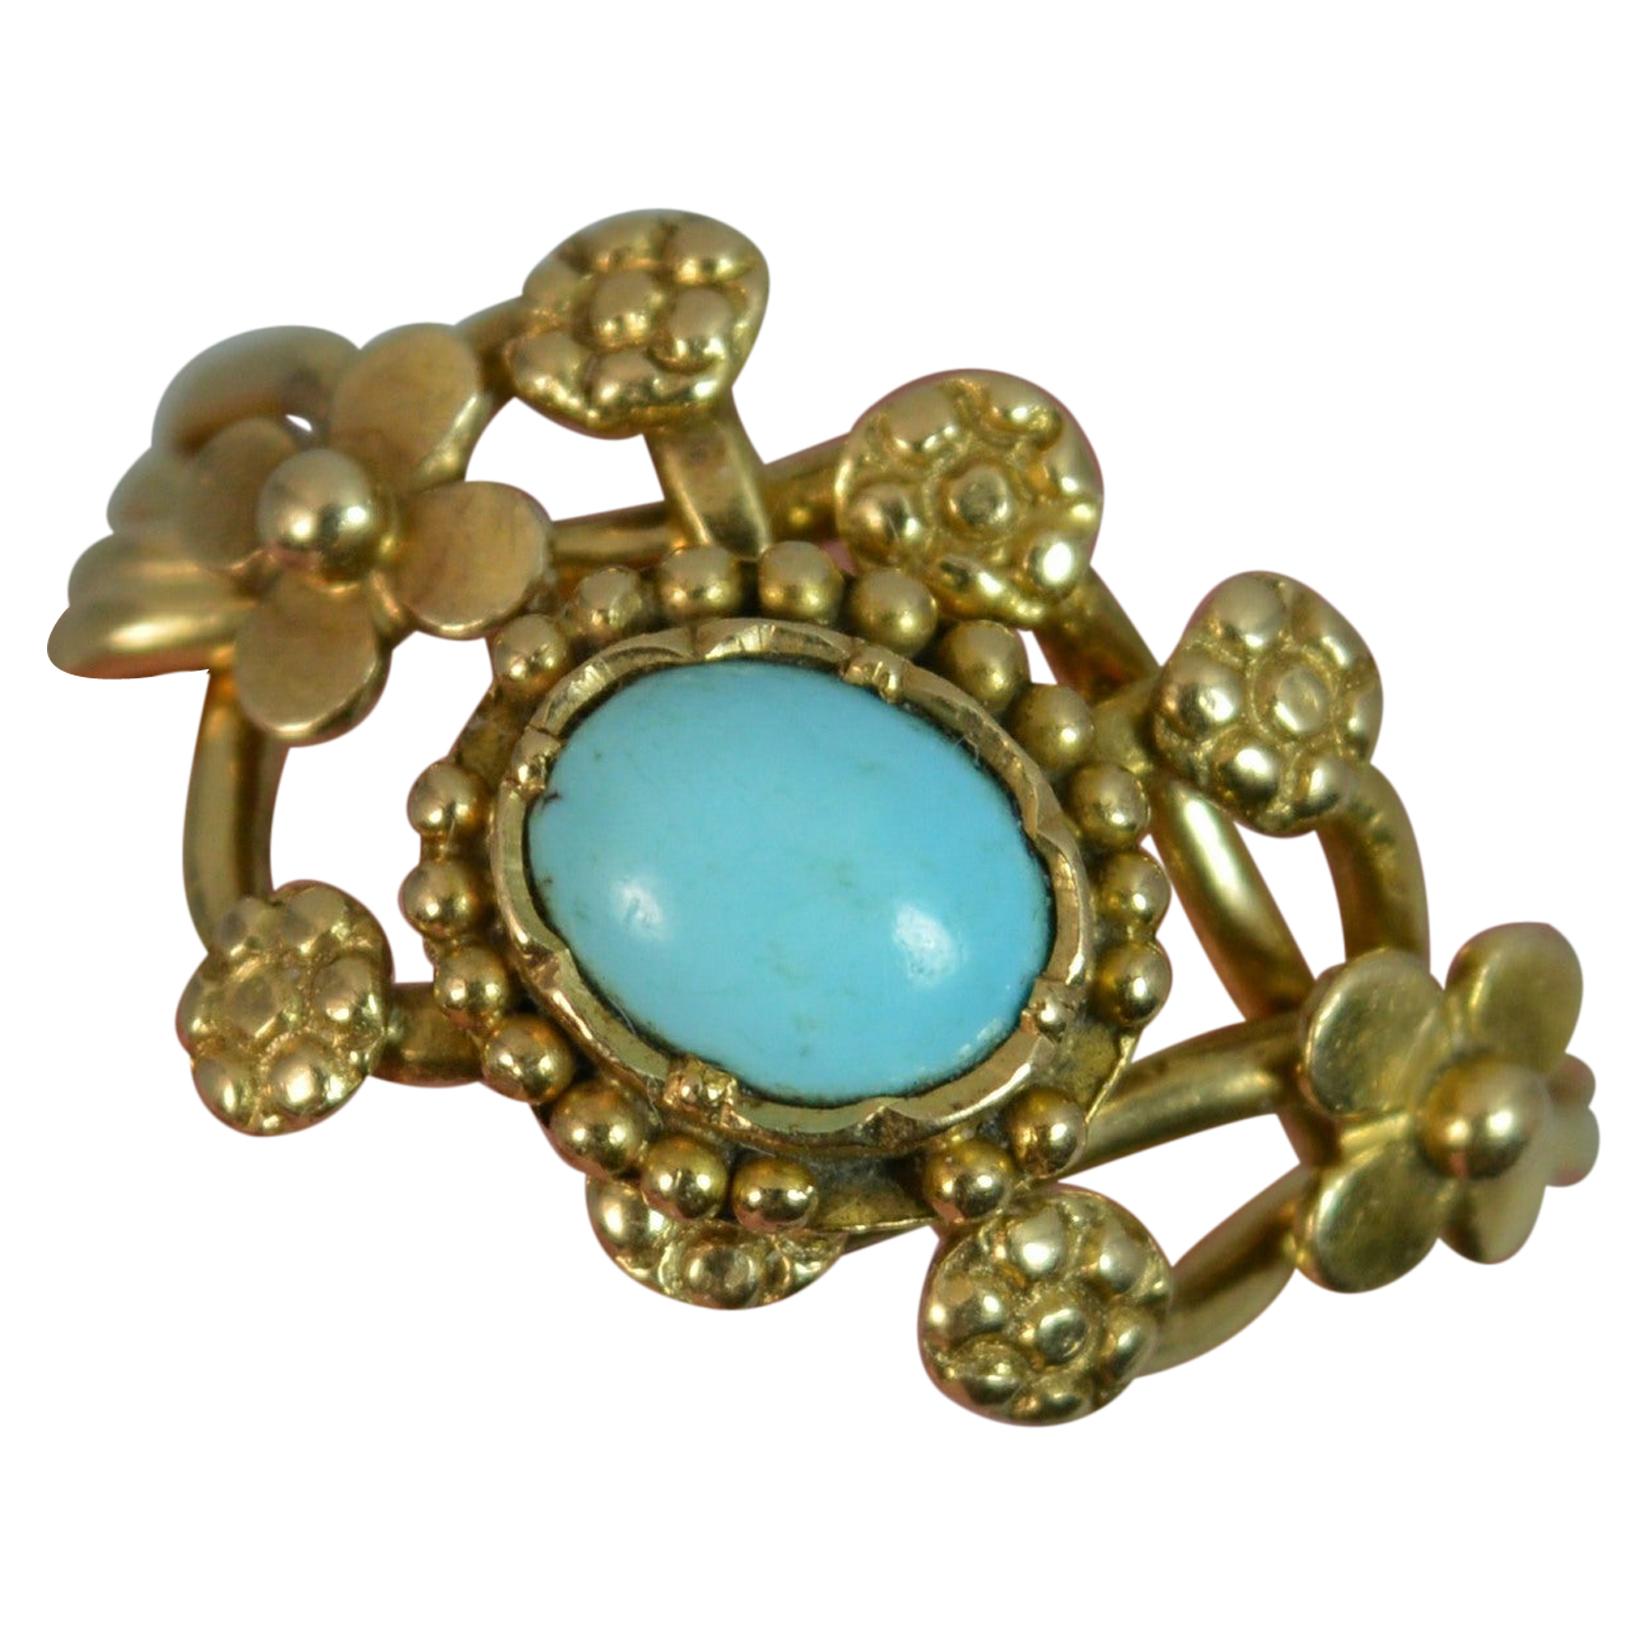 Rare Victorian Turquoise Puzzle Ring in 18 Carat Gold